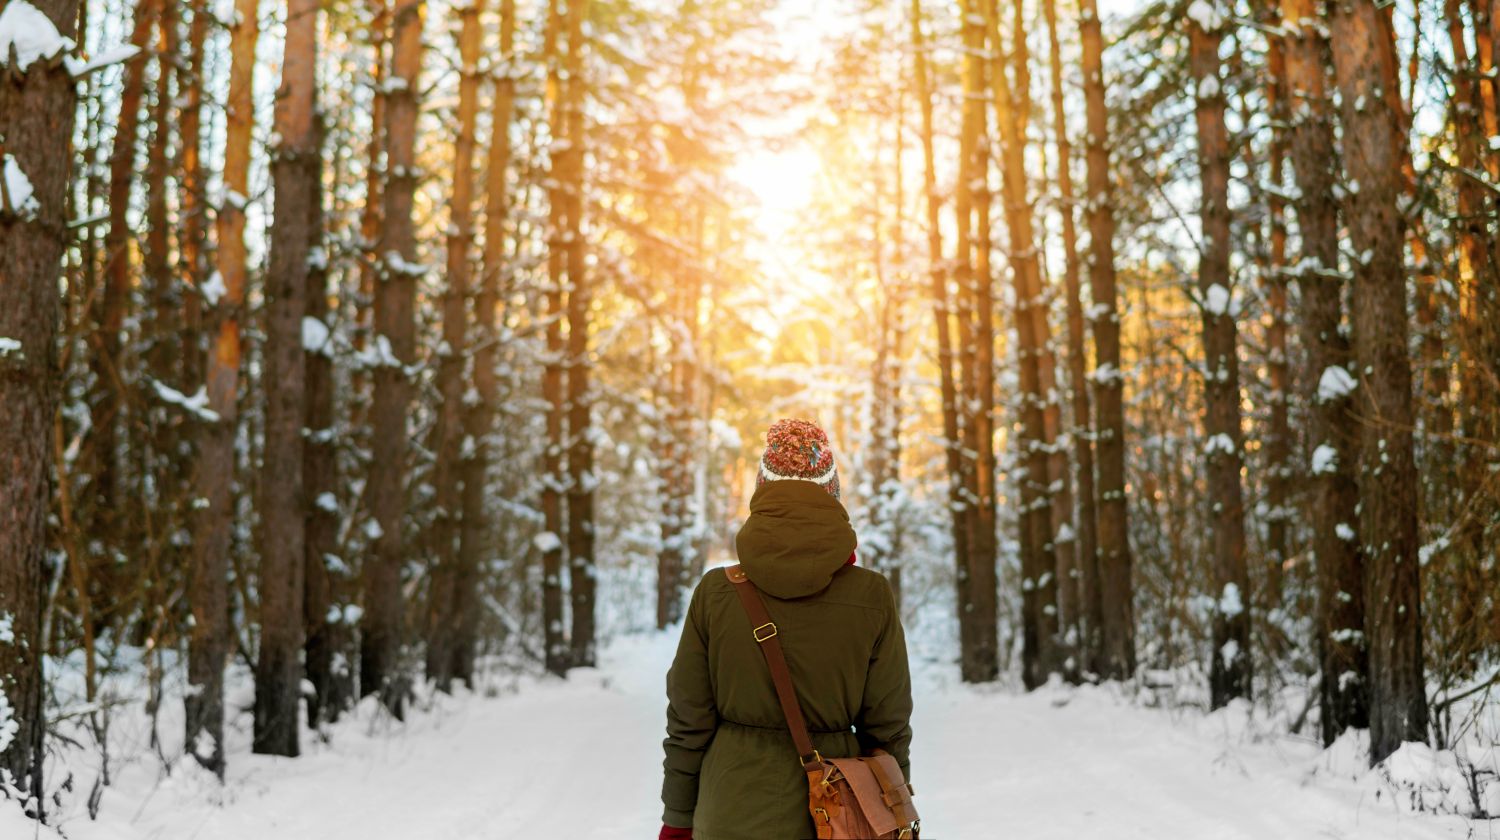 Woman walks a winter forest with the morning light streaming through the trees | Winter Storm Survival: How To Stay Warm And Survive The Cold | Featured